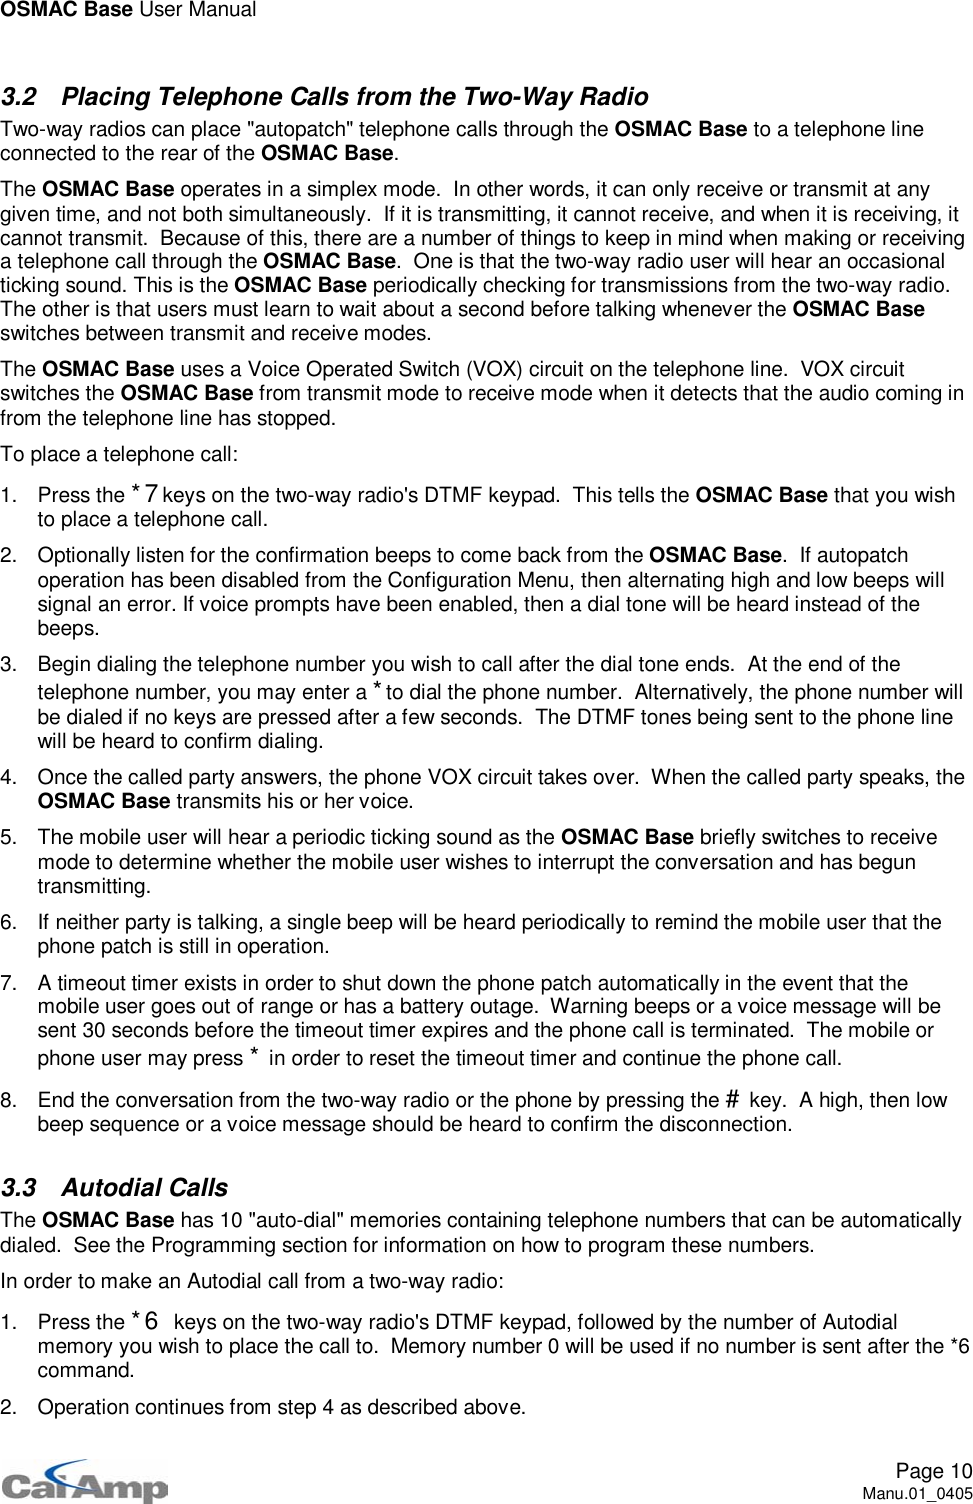 OSMAC Base User ManualPage 10Manu.01_04053.2 Placing Telephone Calls from the Two-Way RadioTwo-way radios can place &quot;autopatch&quot; telephone calls through the OSMAC Base to a telephone lineconnected to the rear of the OSMAC Base.The OSMAC Base operates in a simplex mode. In other words, it can only receive or transmit at anygiven time, and not both simultaneously. If it is transmitting, it cannot receive, and when it is receiving, itcannot transmit. Because of this, there are a number of things to keep in mind when making or receivinga telephone call through the OSMAC Base. One is that the two-way radio user will hear an occasionalticking sound. This is the OSMAC Base periodically checking for transmissions from the two-way radio.The other is that users must learn to wait about a second before talking whenever the OSMAC Baseswitches between transmit and receive modes.The OSMAC Base uses a Voice Operated Switch (VOX) circuit on the telephone line. VOX circuitswitches the OSMAC Base from transmit mode to receive mode when it detects that the audio coming infrom the telephone line has stopped.To place a telephone call:1. Press the *7keys on the two-way radio&apos;s DTMF keypad. This tells the OSMAC Base that you wishto place a telephone call.2. Optionally listen for the confirmation beeps to come back from the OSMAC Base. If autopatchoperation has been disabled from the Configuration Menu, then alternating high and low beeps willsignal an error. If voice prompts have been enabled, then a dial tone will be heard instead of thebeeps.3. Begin dialing the telephone number you wish to call after the dial tone ends. At the end of thetelephone number, you may enter a *to dial the phone number. Alternatively, the phone number willbe dialed if no keys are pressed after a few seconds. The DTMF tones being sent to the phone linewill be heard to confirm dialing.4. Once the called party answers, the phone VOX circuit takes over. When the called party speaks, theOSMAC Base transmits his or her voice.5. The mobile user will hear a periodic ticking sound as the OSMAC Base briefly switches to receivemode to determine whether the mobile user wishes to interrupt the conversation and has beguntransmitting.6. If neither party is talking, a single beep will be heard periodically to remind the mobile user that thephone patch is still in operation.7. A timeout timer exists in order to shut down the phone patch automatically in the event that themobile user goes out of range or has a battery outage. Warning beeps or a voice message will besent 30 seconds before the timeout timer expires and the phone call is terminated. The mobile orphone user may press *in order to reset the timeout timer and continue the phone call.8. End the conversation from the two-way radio or the phone by pressing the #key. A high, then lowbeep sequence or a voice message should be heard to confirm the disconnection.3.3 Autodial CallsThe OSMAC Base has 10 &quot;auto-dial&quot; memories containing telephone numbers that can be automaticallydialed. See the Programming section for information on how to program these numbers.In order to make an Autodial call from a two-way radio:1. Press the *6 keys on the two-way radio&apos;s DTMF keypad, followed by the number of Autodialmemory you wish to place the call to. Memory number 0 will be used if no number is sent after the *6command.2. Operation continues from step 4 as described above.